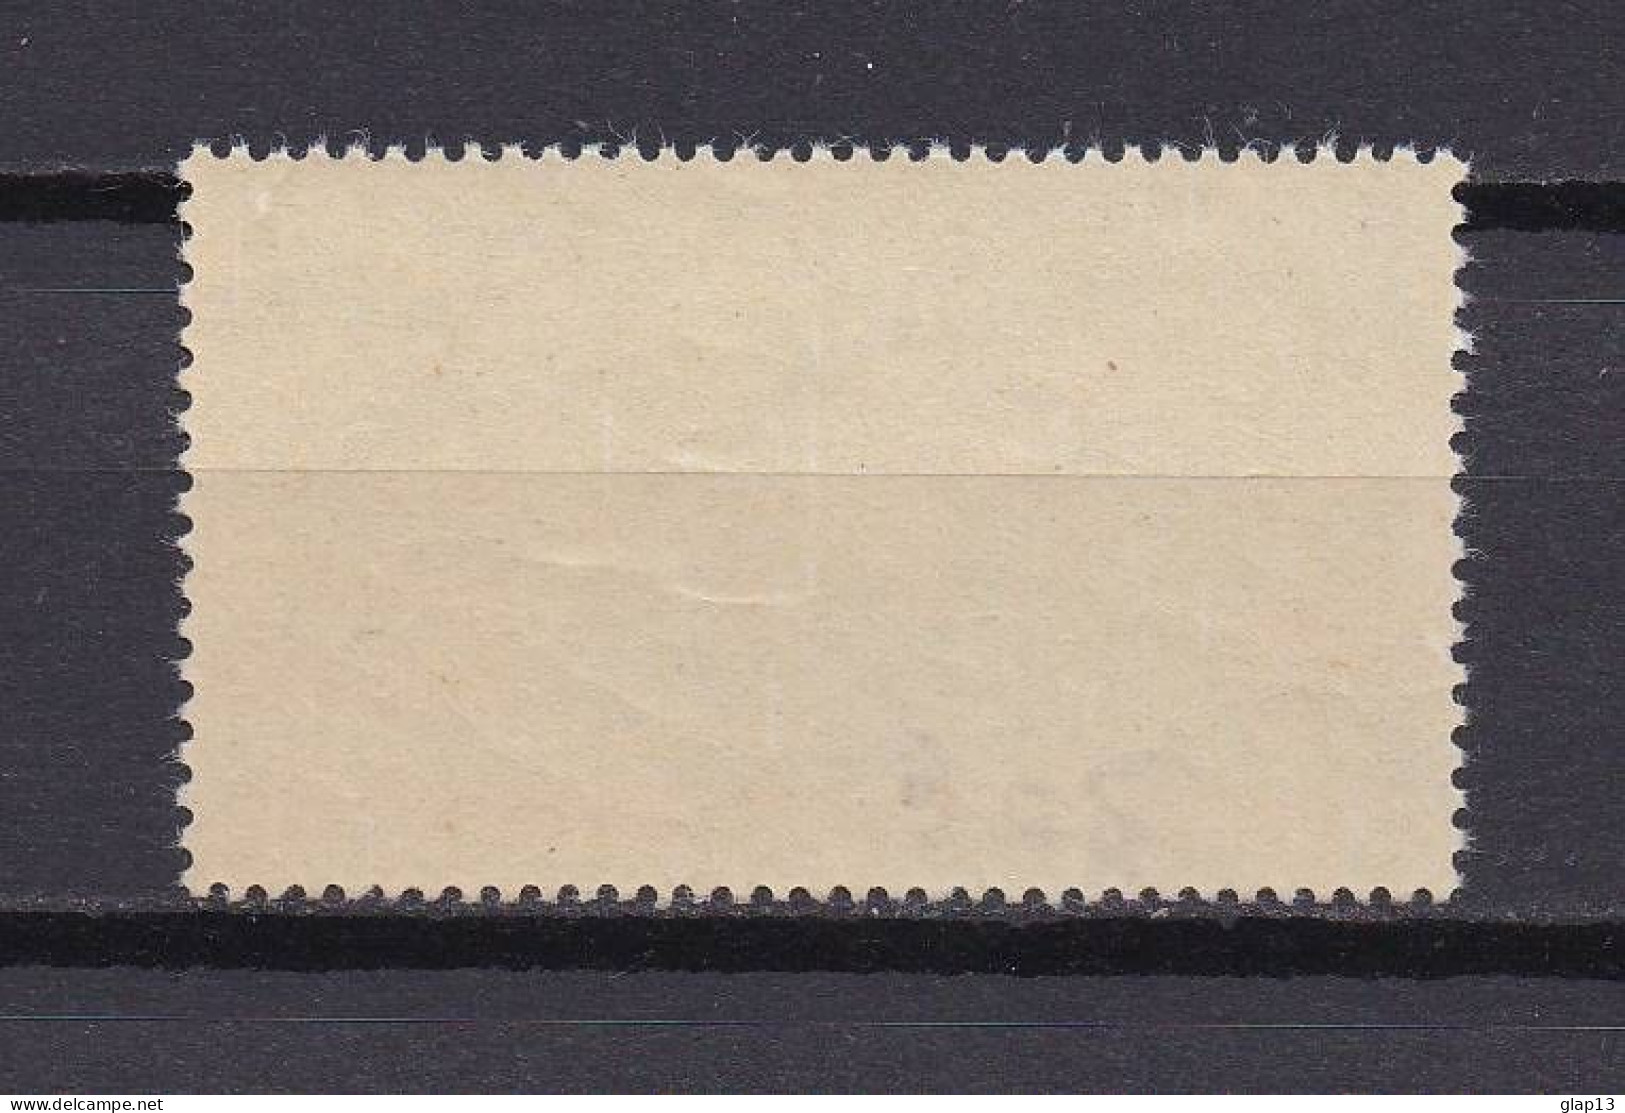 NOUVELLE-CALEDONIE 1962 TIMBRE N°305 NEUF AVEC CHARNIERE CONFERENCE - Unused Stamps